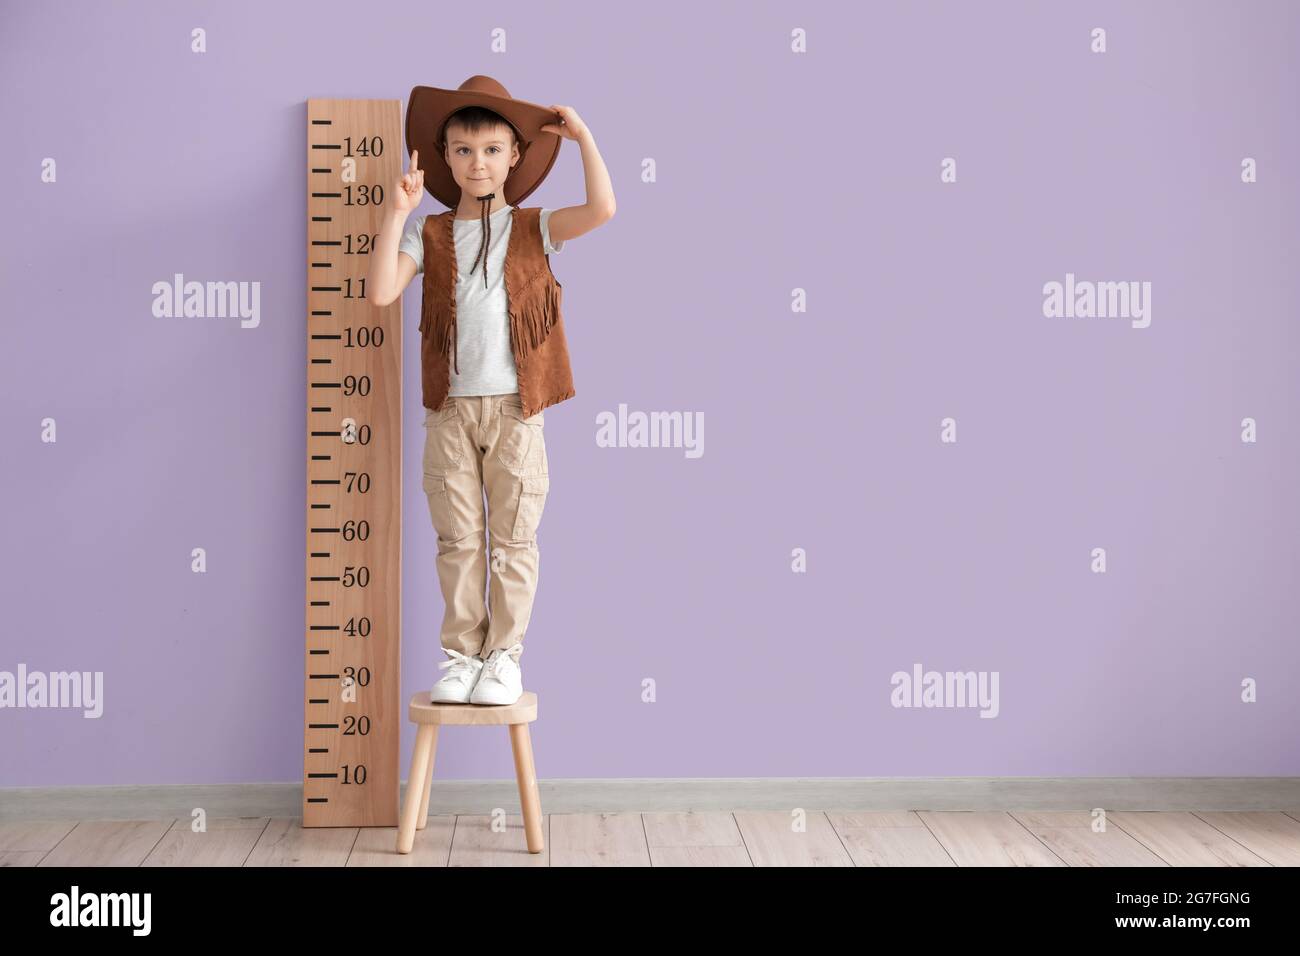 Little boy measuring height near color wall Stock Photo